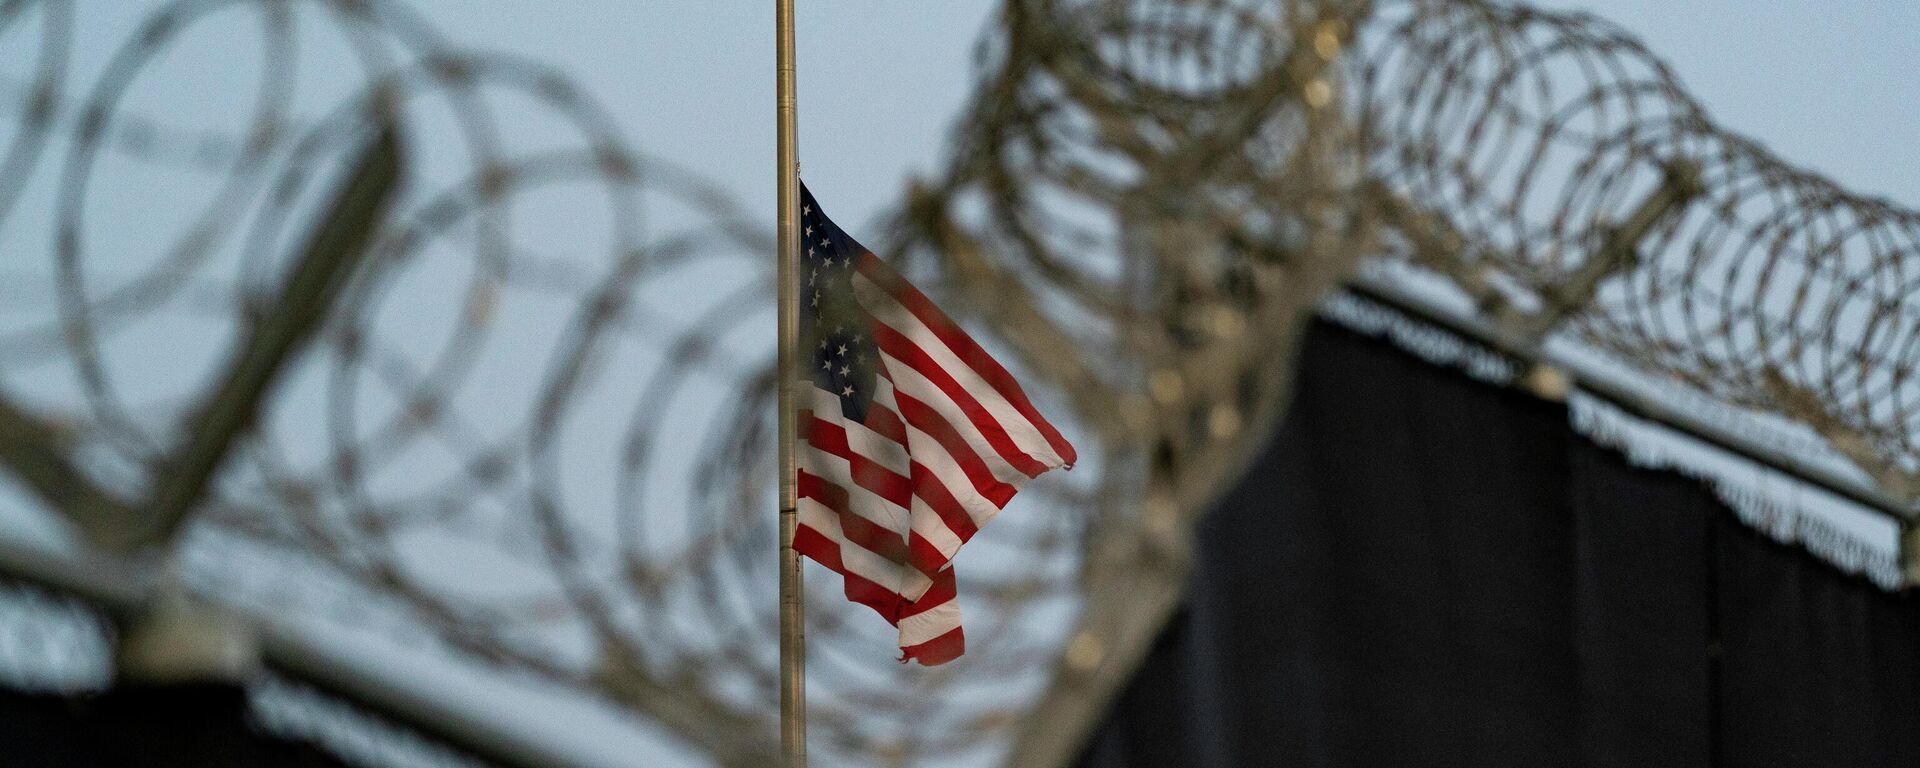 In this Aug. 29, 2021, file photo reviewed by U.S. military officials, a flag flies at half-staff in honor of the U.S. service members and other victims killed in the terrorist attack in Kabul, Afghanistan, as seen from Camp Justice in Guantanamo Bay Naval Base, Cuba. - Sputnik International, 1920, 06.01.2022